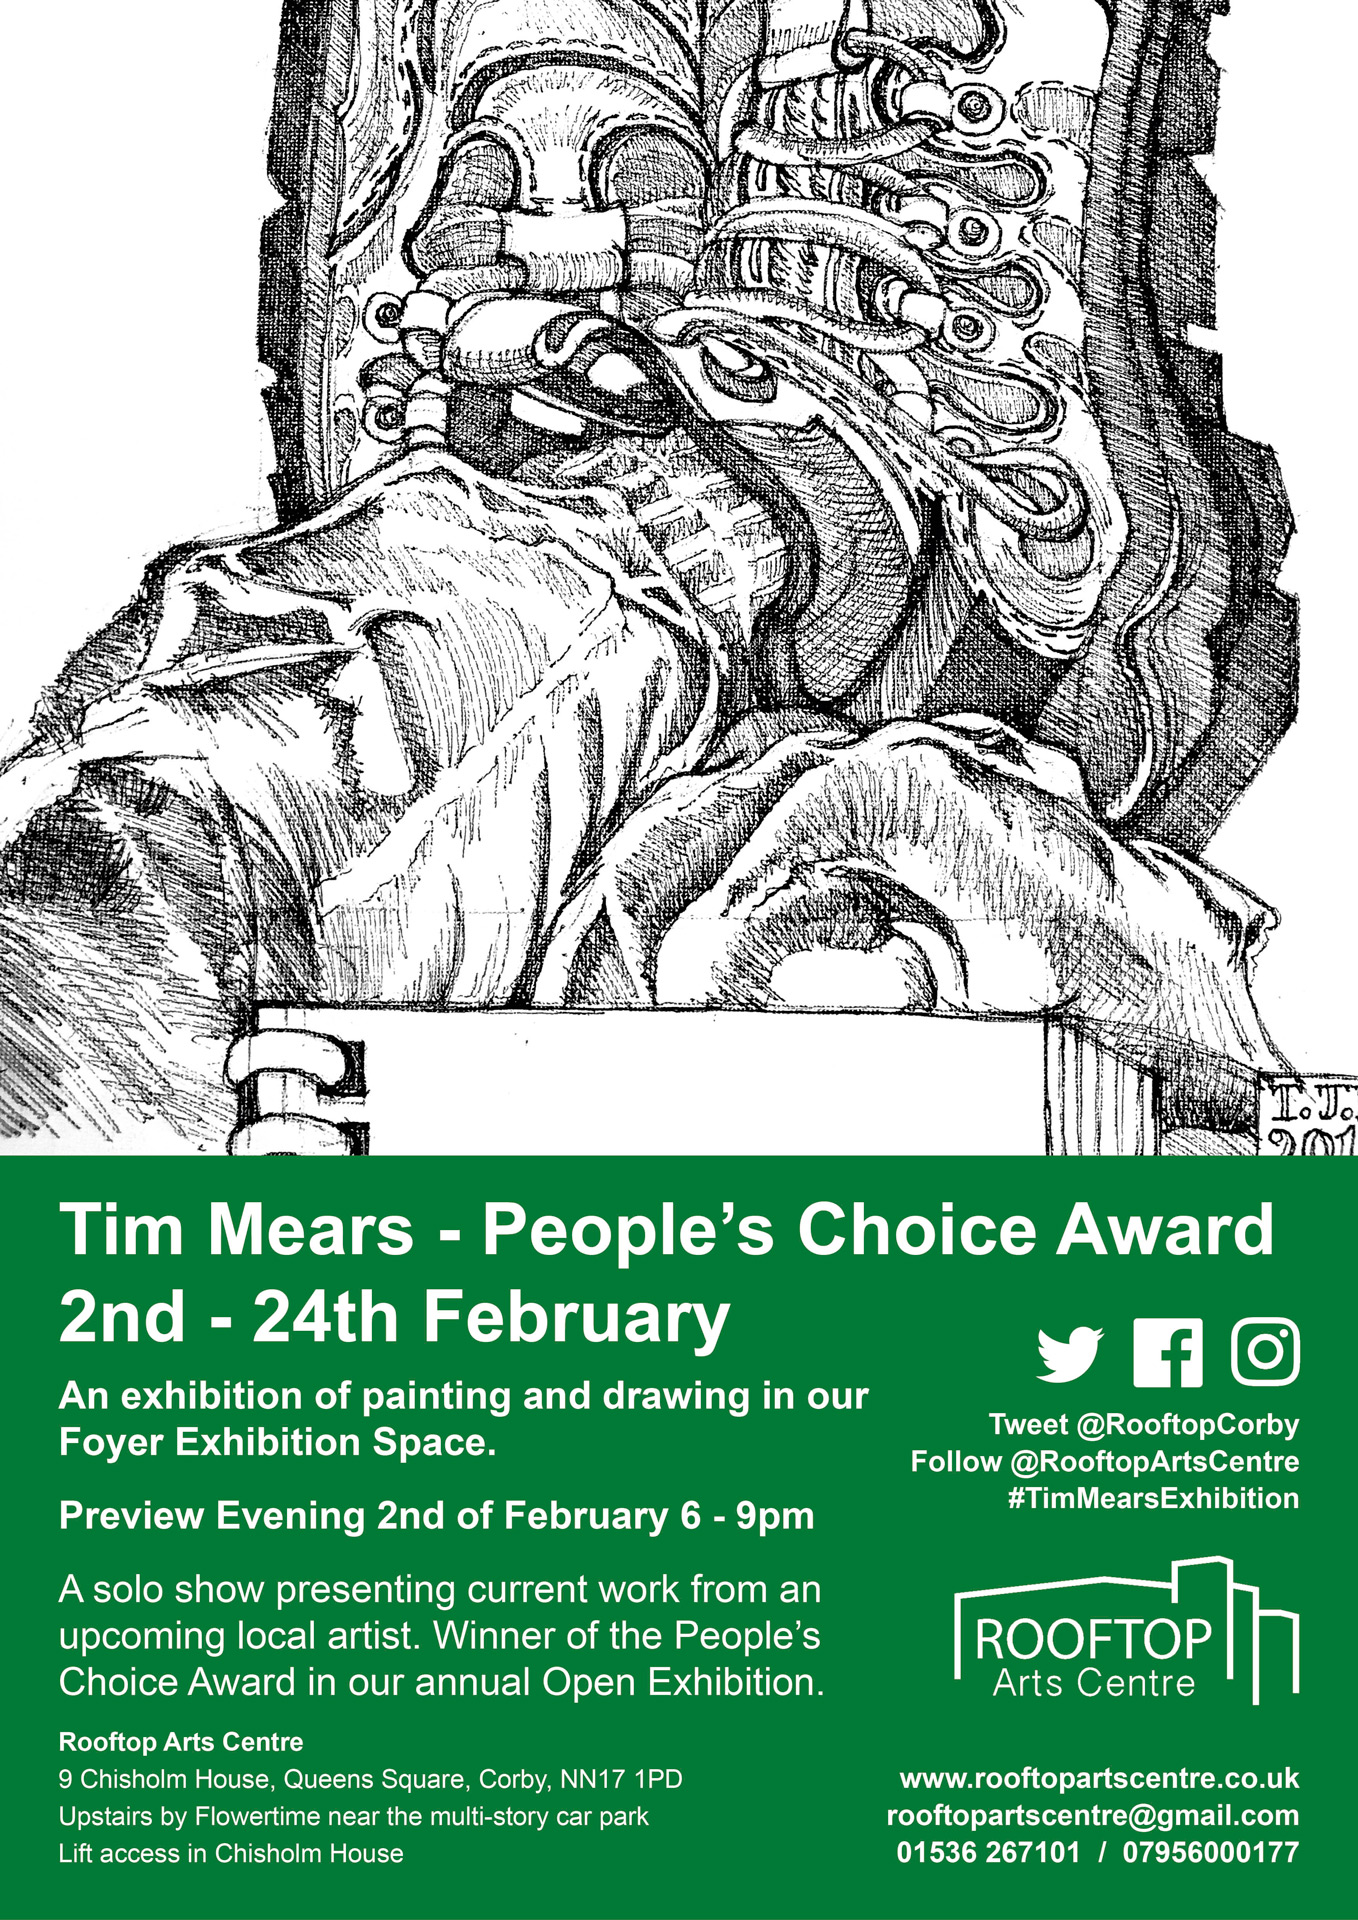 Poster advertising Tim Mears Exhibition